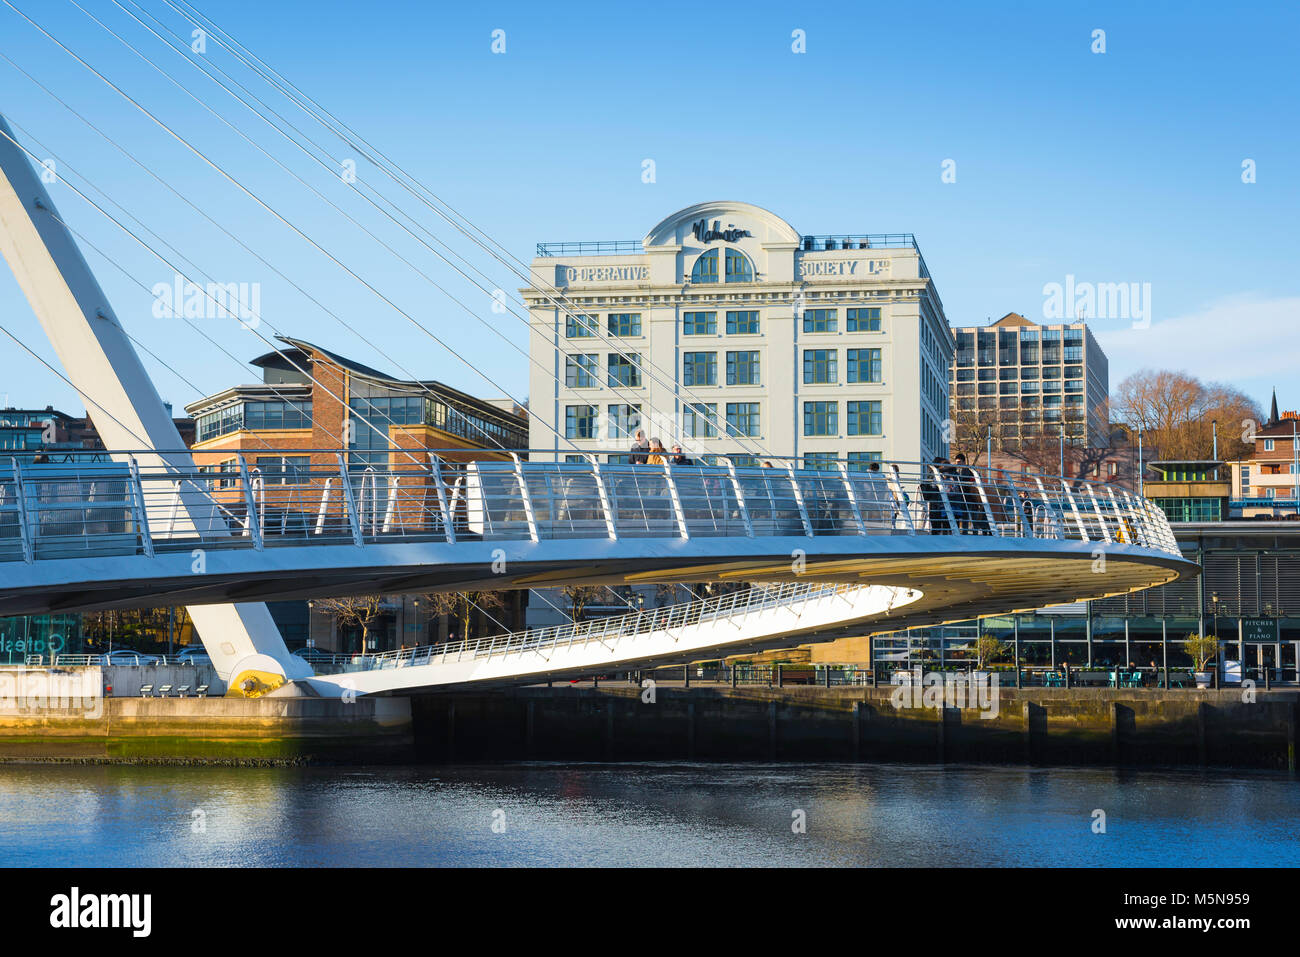 View of young people walking across the Millennium Bridge with the Quayside area of the city of Newcastle upon Tyne in the background, England, UK Stock Photo